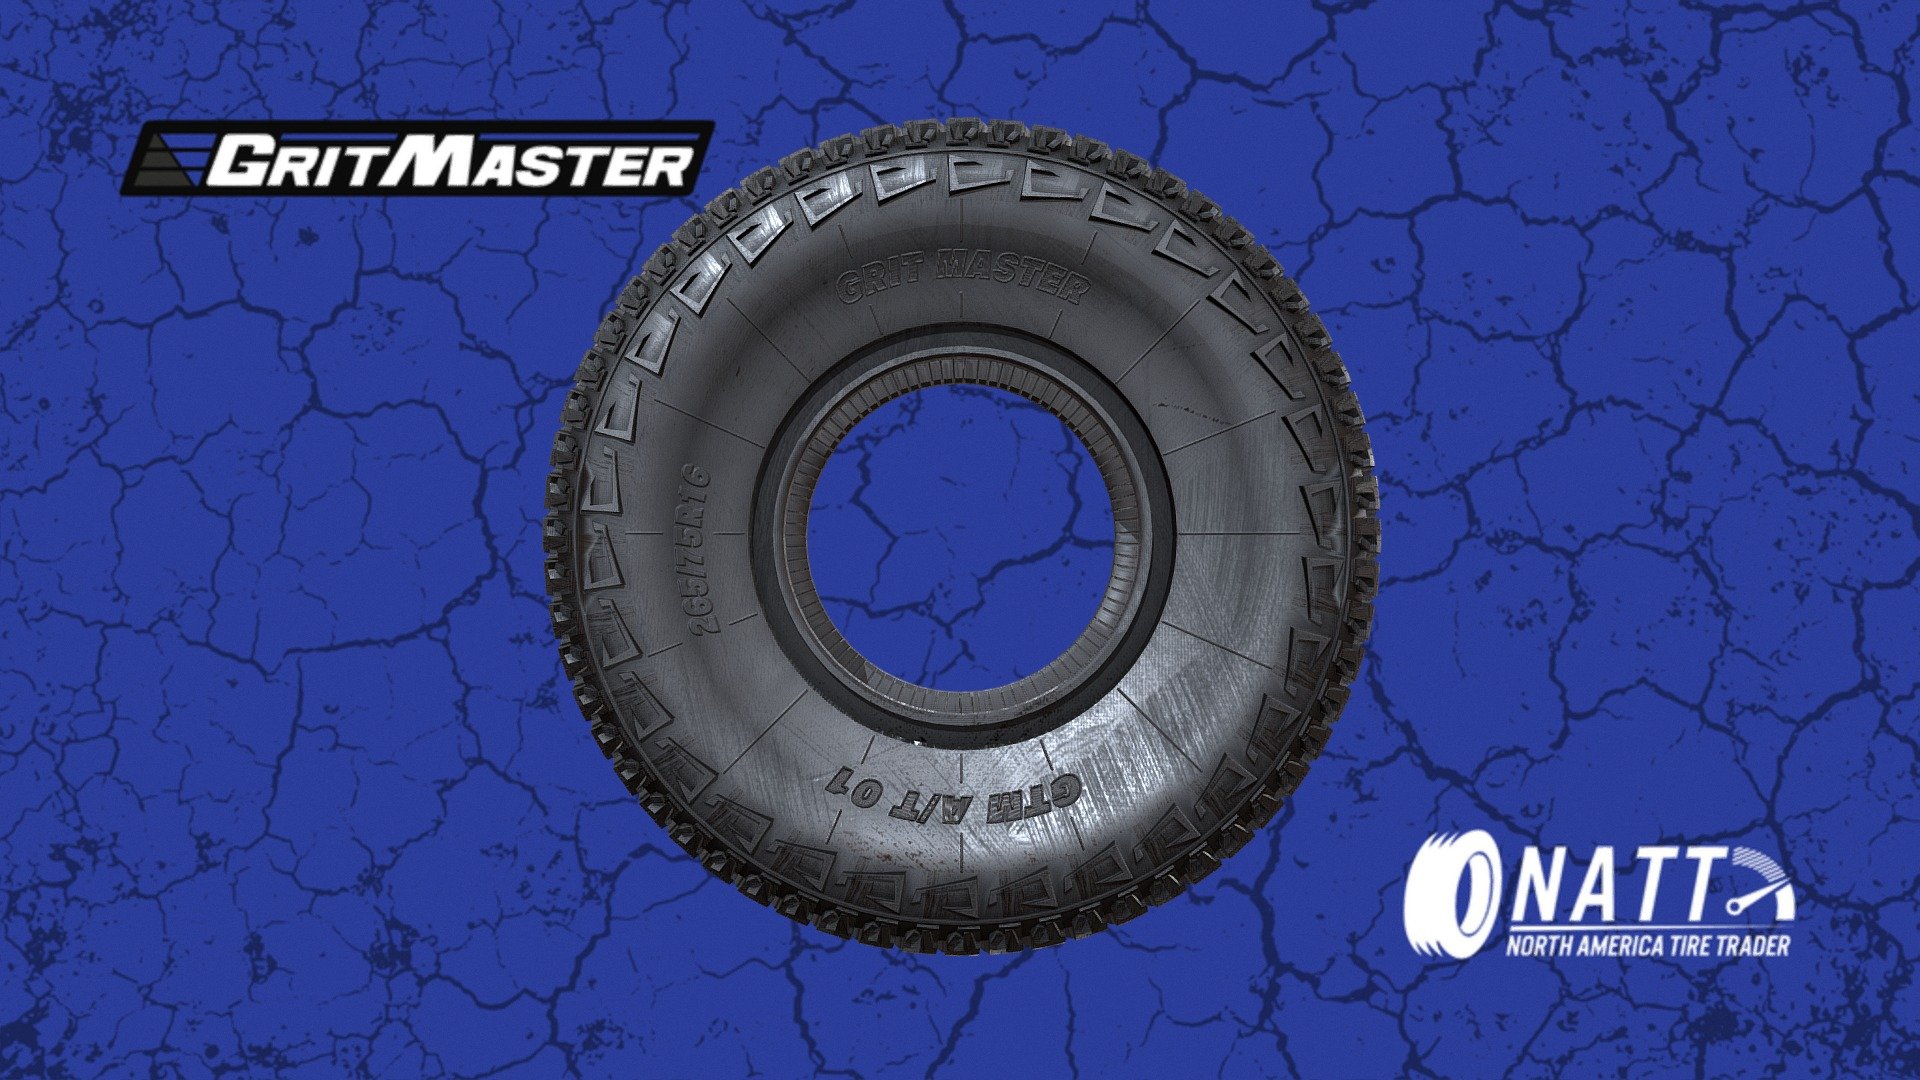 Imported by NATT, one of the largest tire suppliers In the US.




GritMaster Official Site

About this tire

You'll fall in love with our brands and prices like this tire did with the wheel.

Contact us!




sales@nattusa.com

+1 469-855-4125



 - GTM AT 01 - GRITMASTER - 3D model by Tire Direct (@tire.direct) 3d model